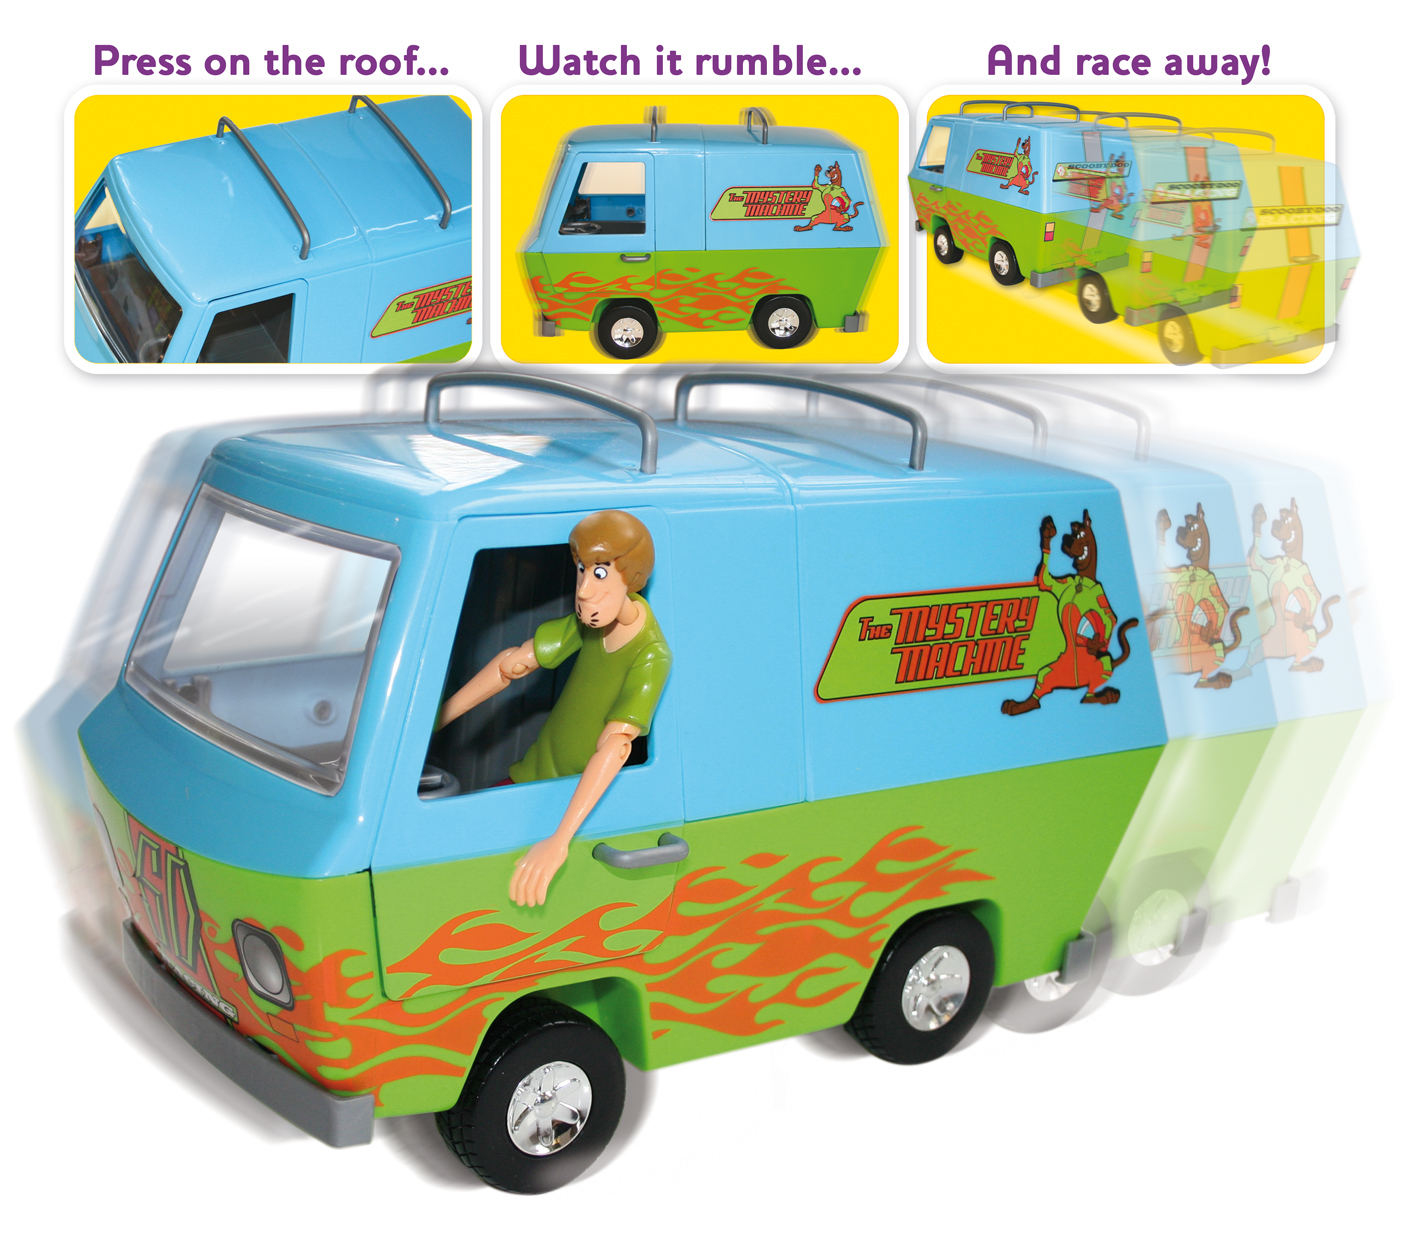 Now you can race off in the new Rumble and Race Mystery Machine to solve the latest Mystery! With a 